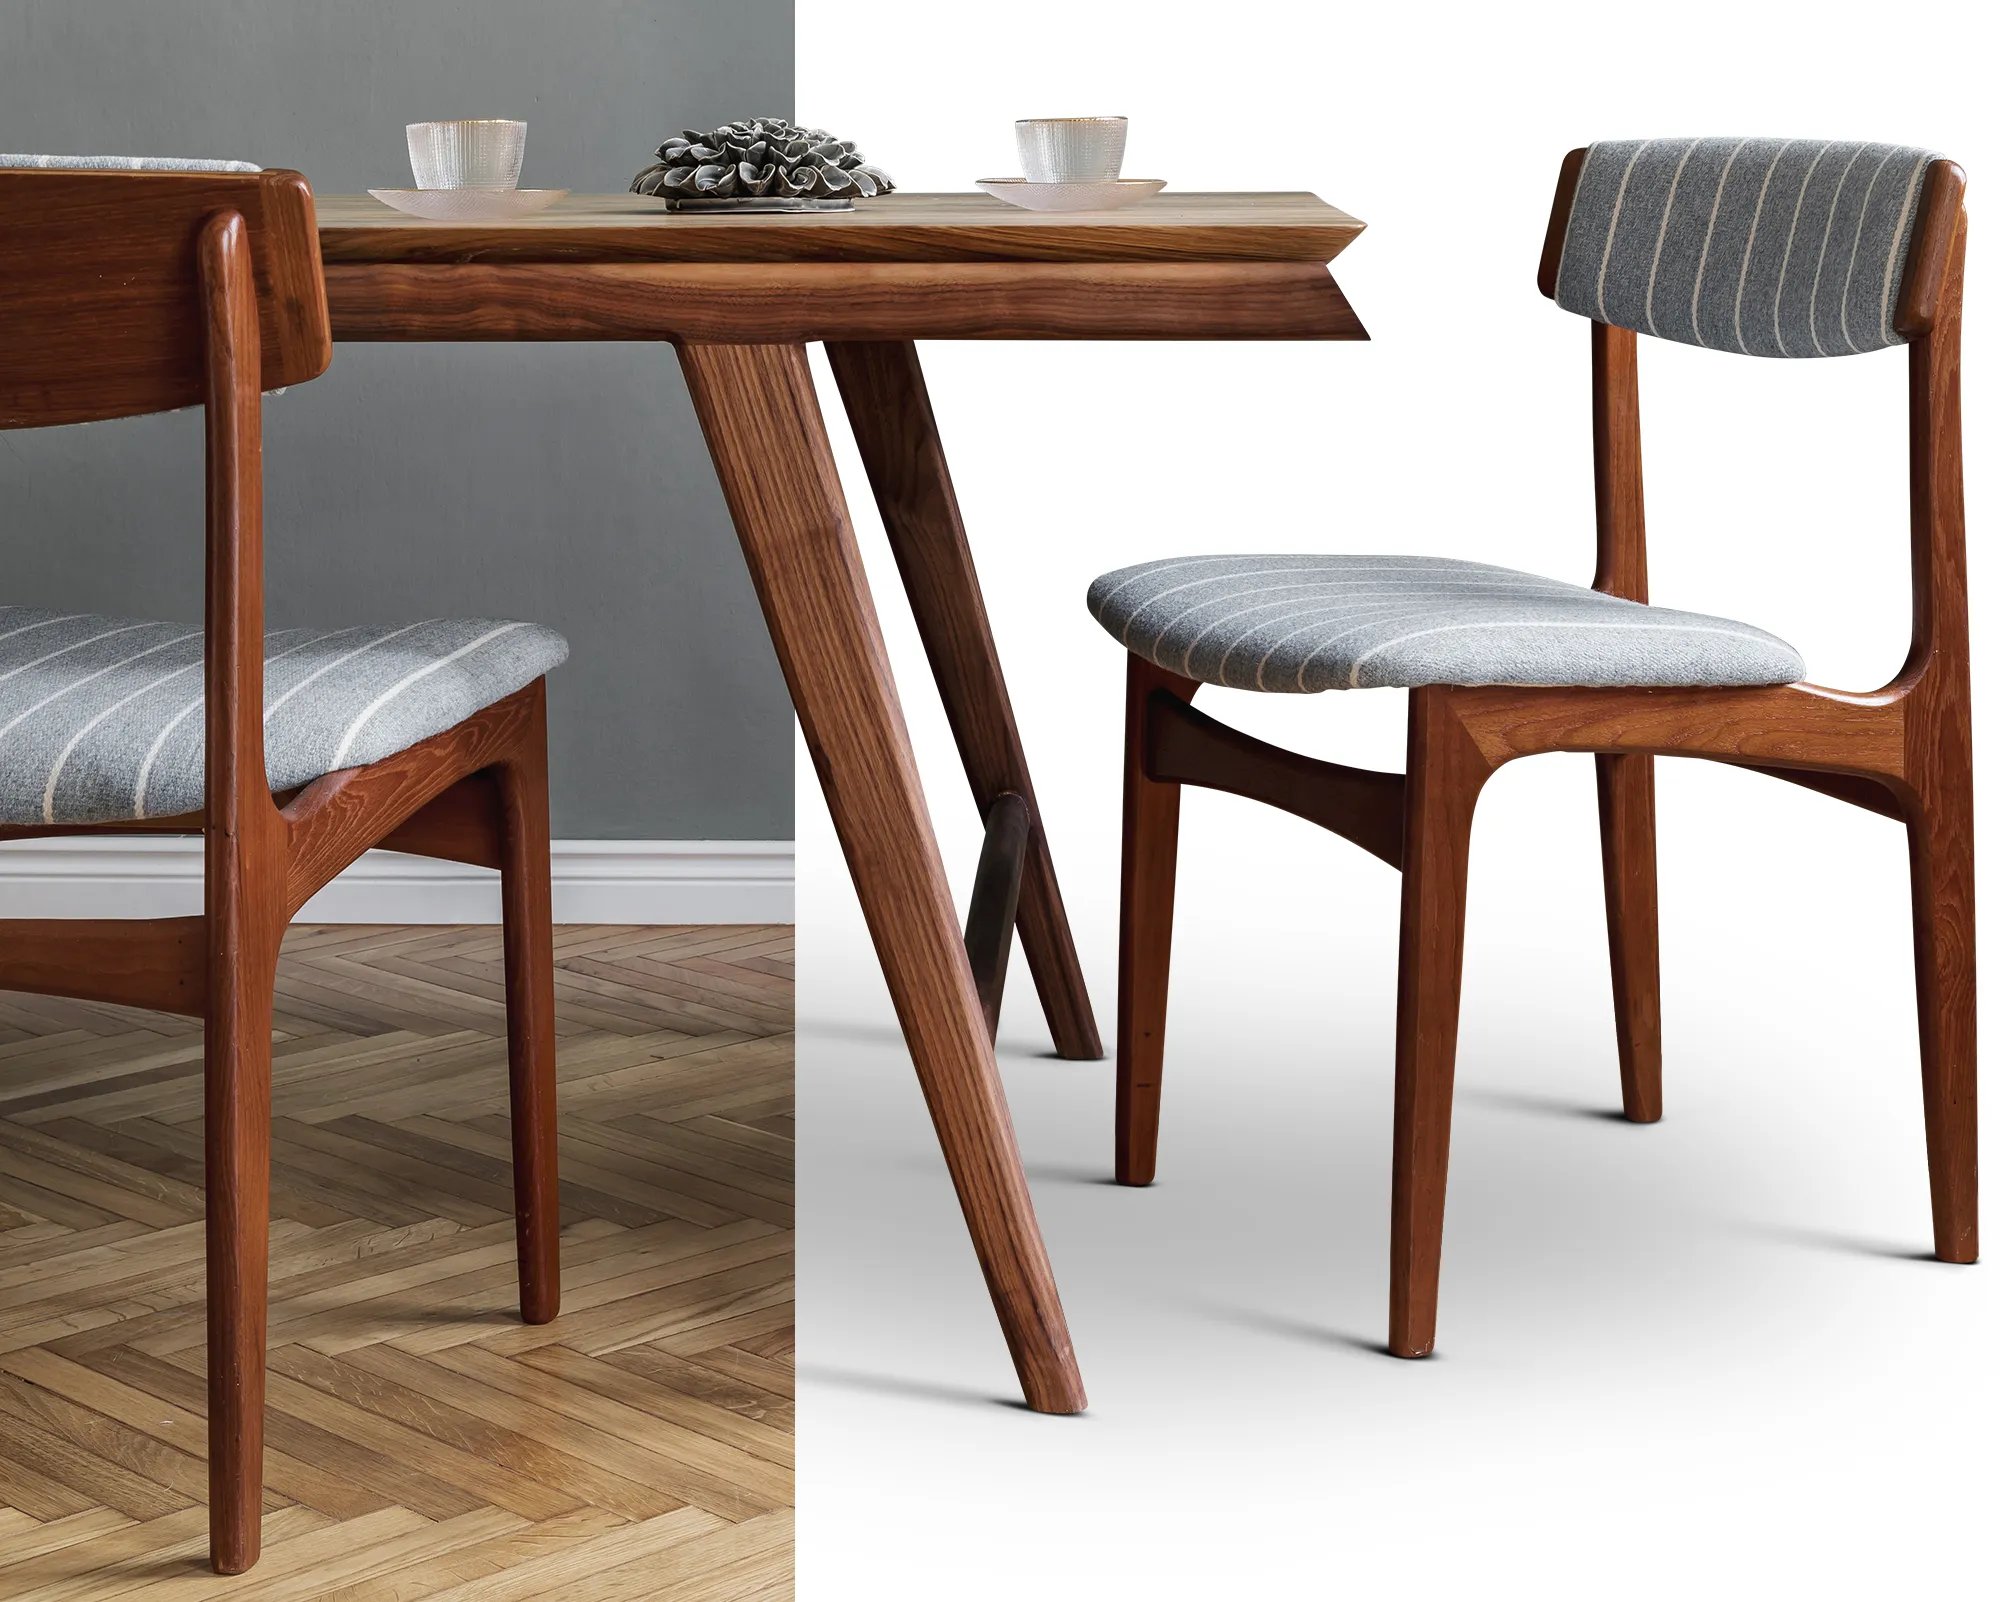 Furniture Retouching Services Sample by Studio Metrodesk